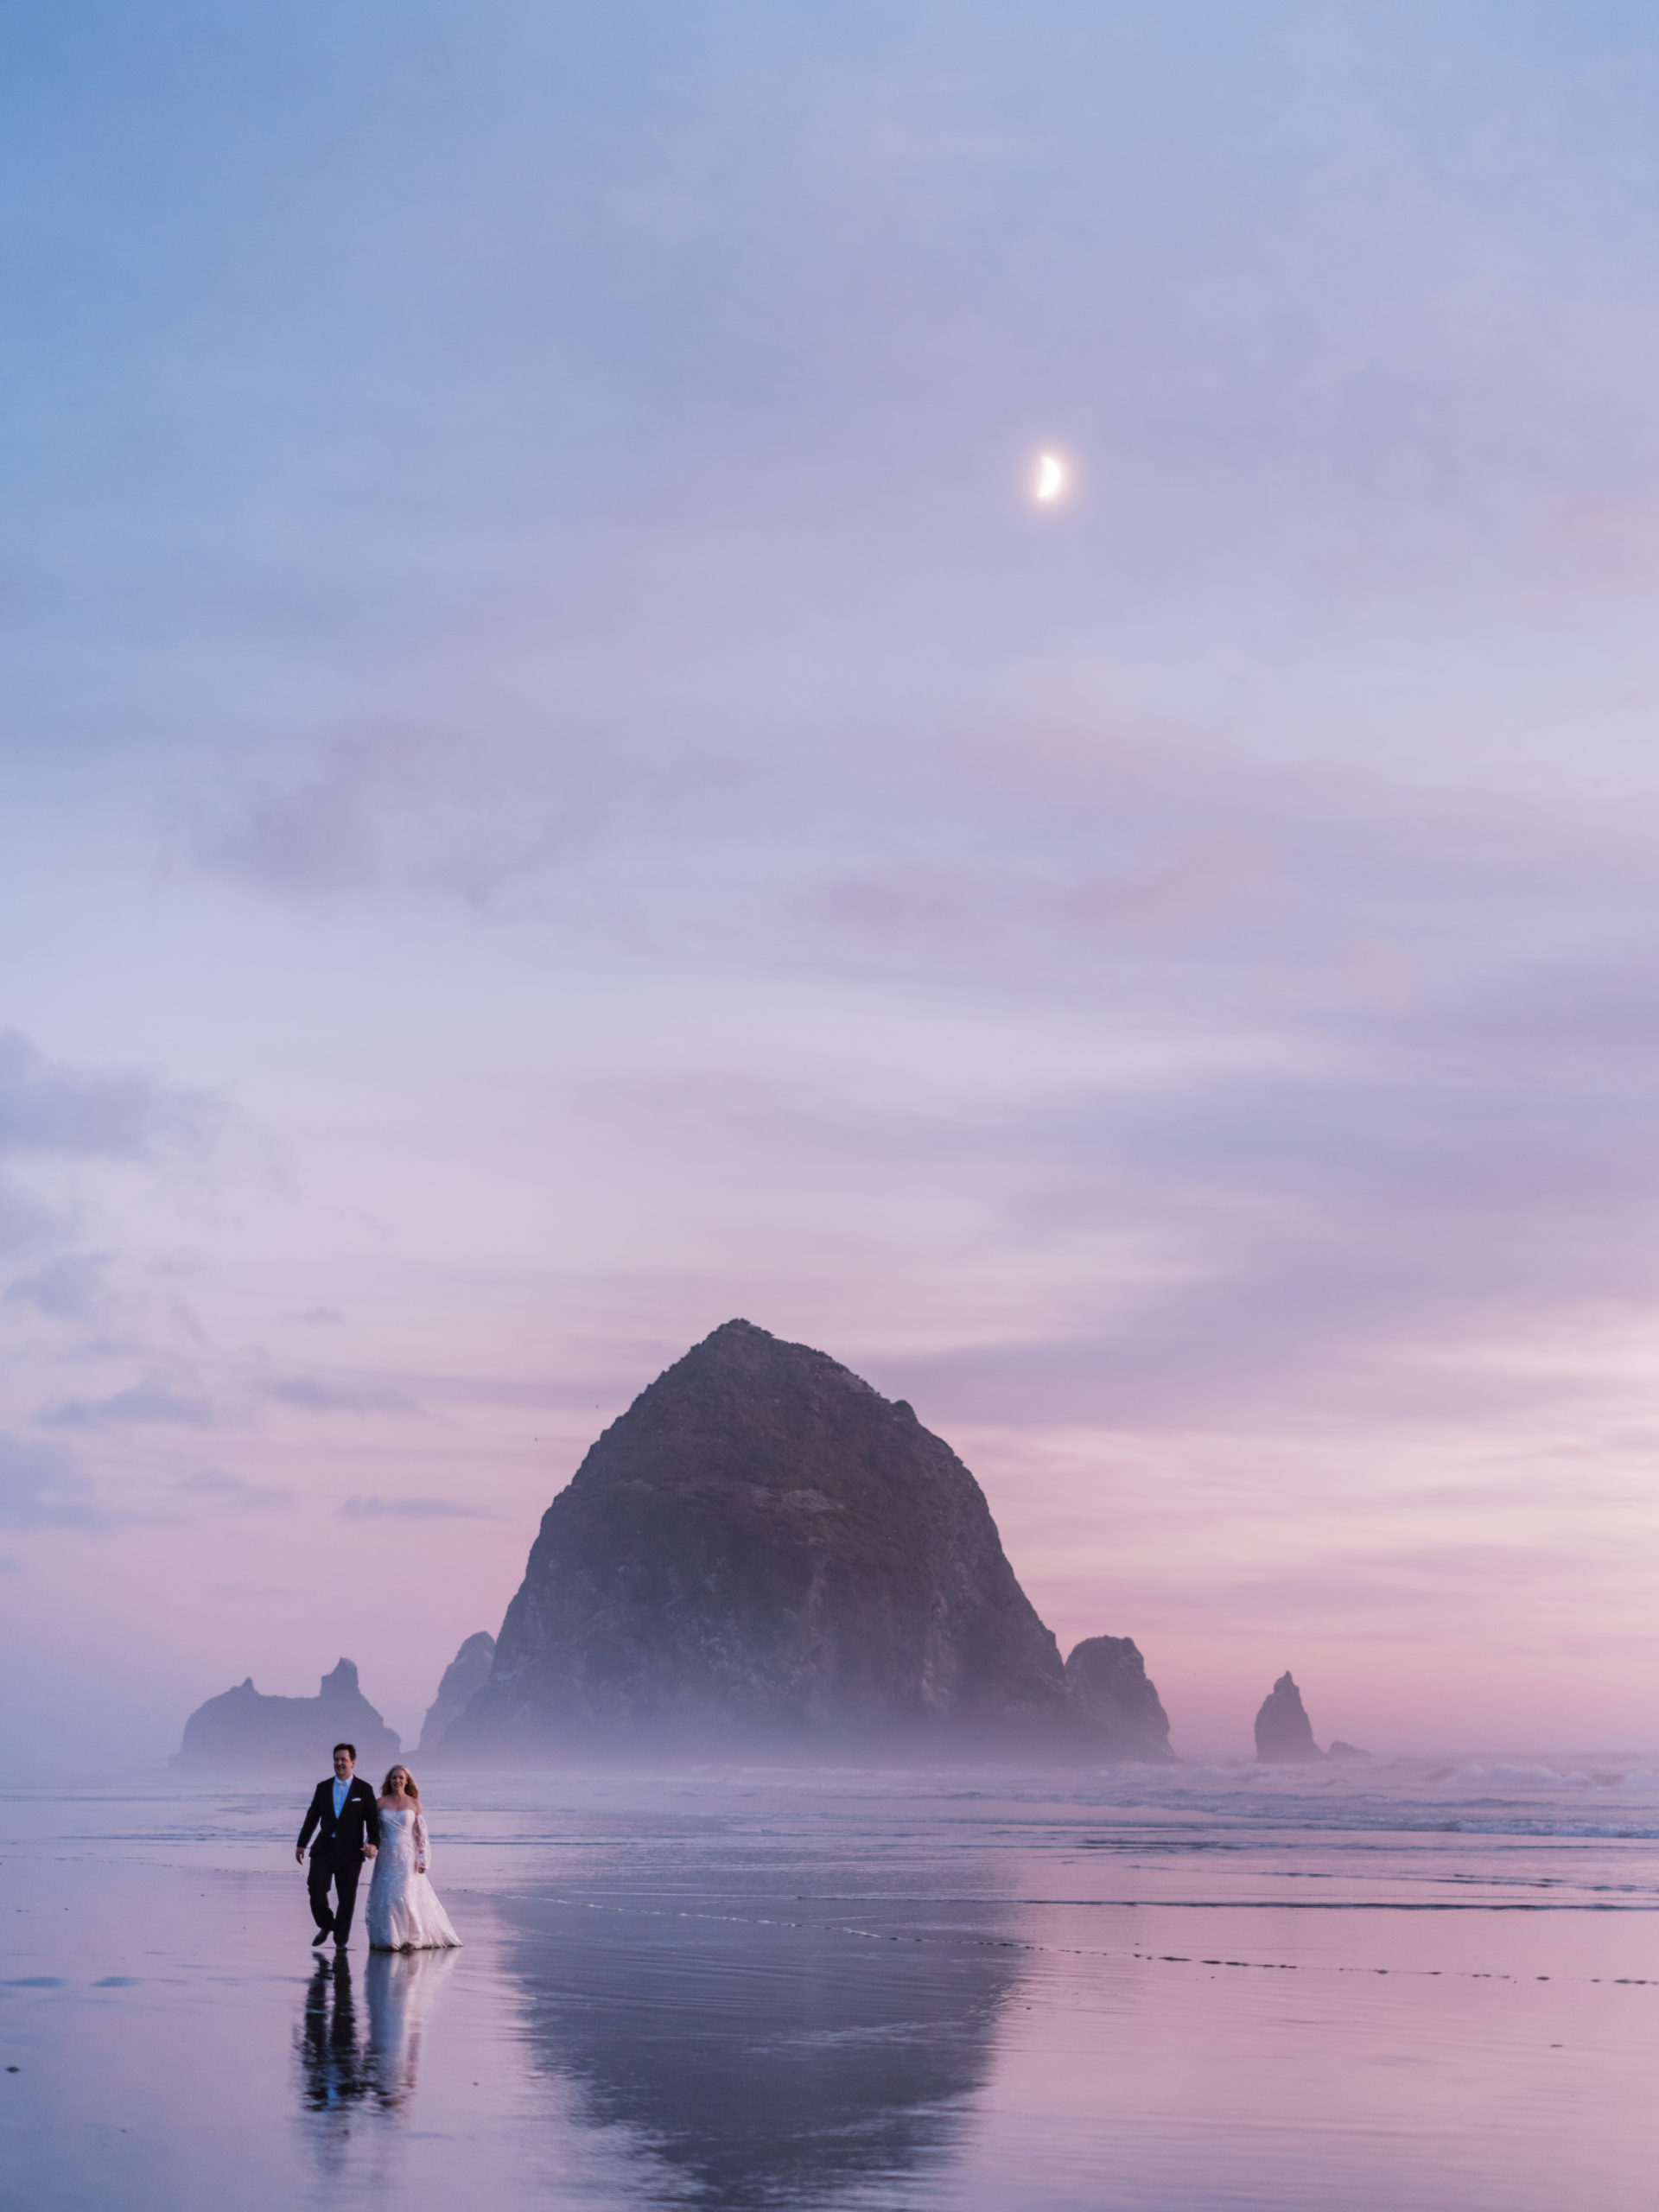 Cannon Beach Wedding - Bride and Groom at Sunset Haystack Rock with Moon by Mirelle Carmichael Fine Art Photography fujifilm gfx100s 3